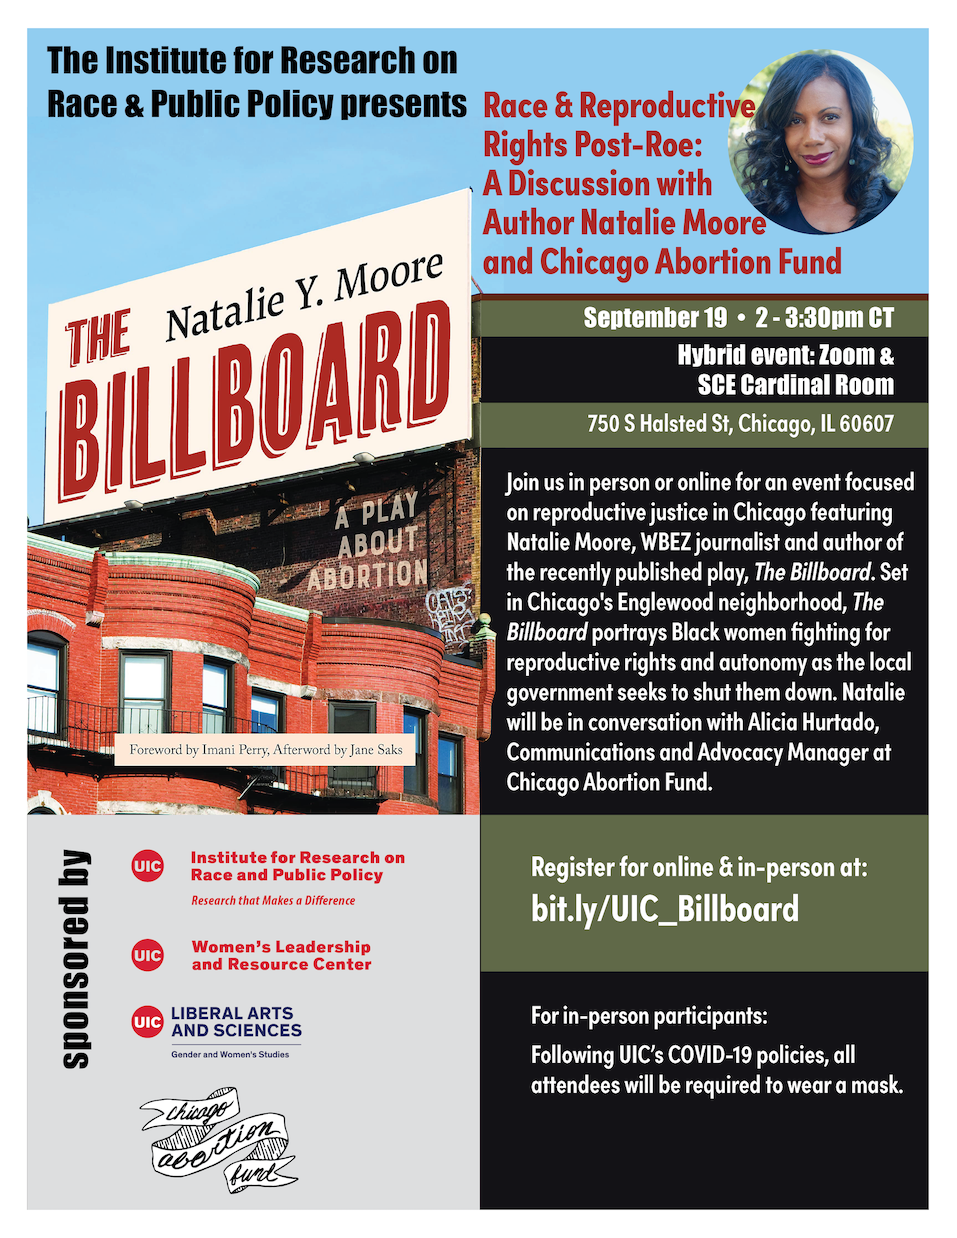 The cover of The Billboard, featuring a billboard hanging above a Chicago apartment building. To its right is a photo of Natalie Moore. Below that are details about the event (the same info on this page).